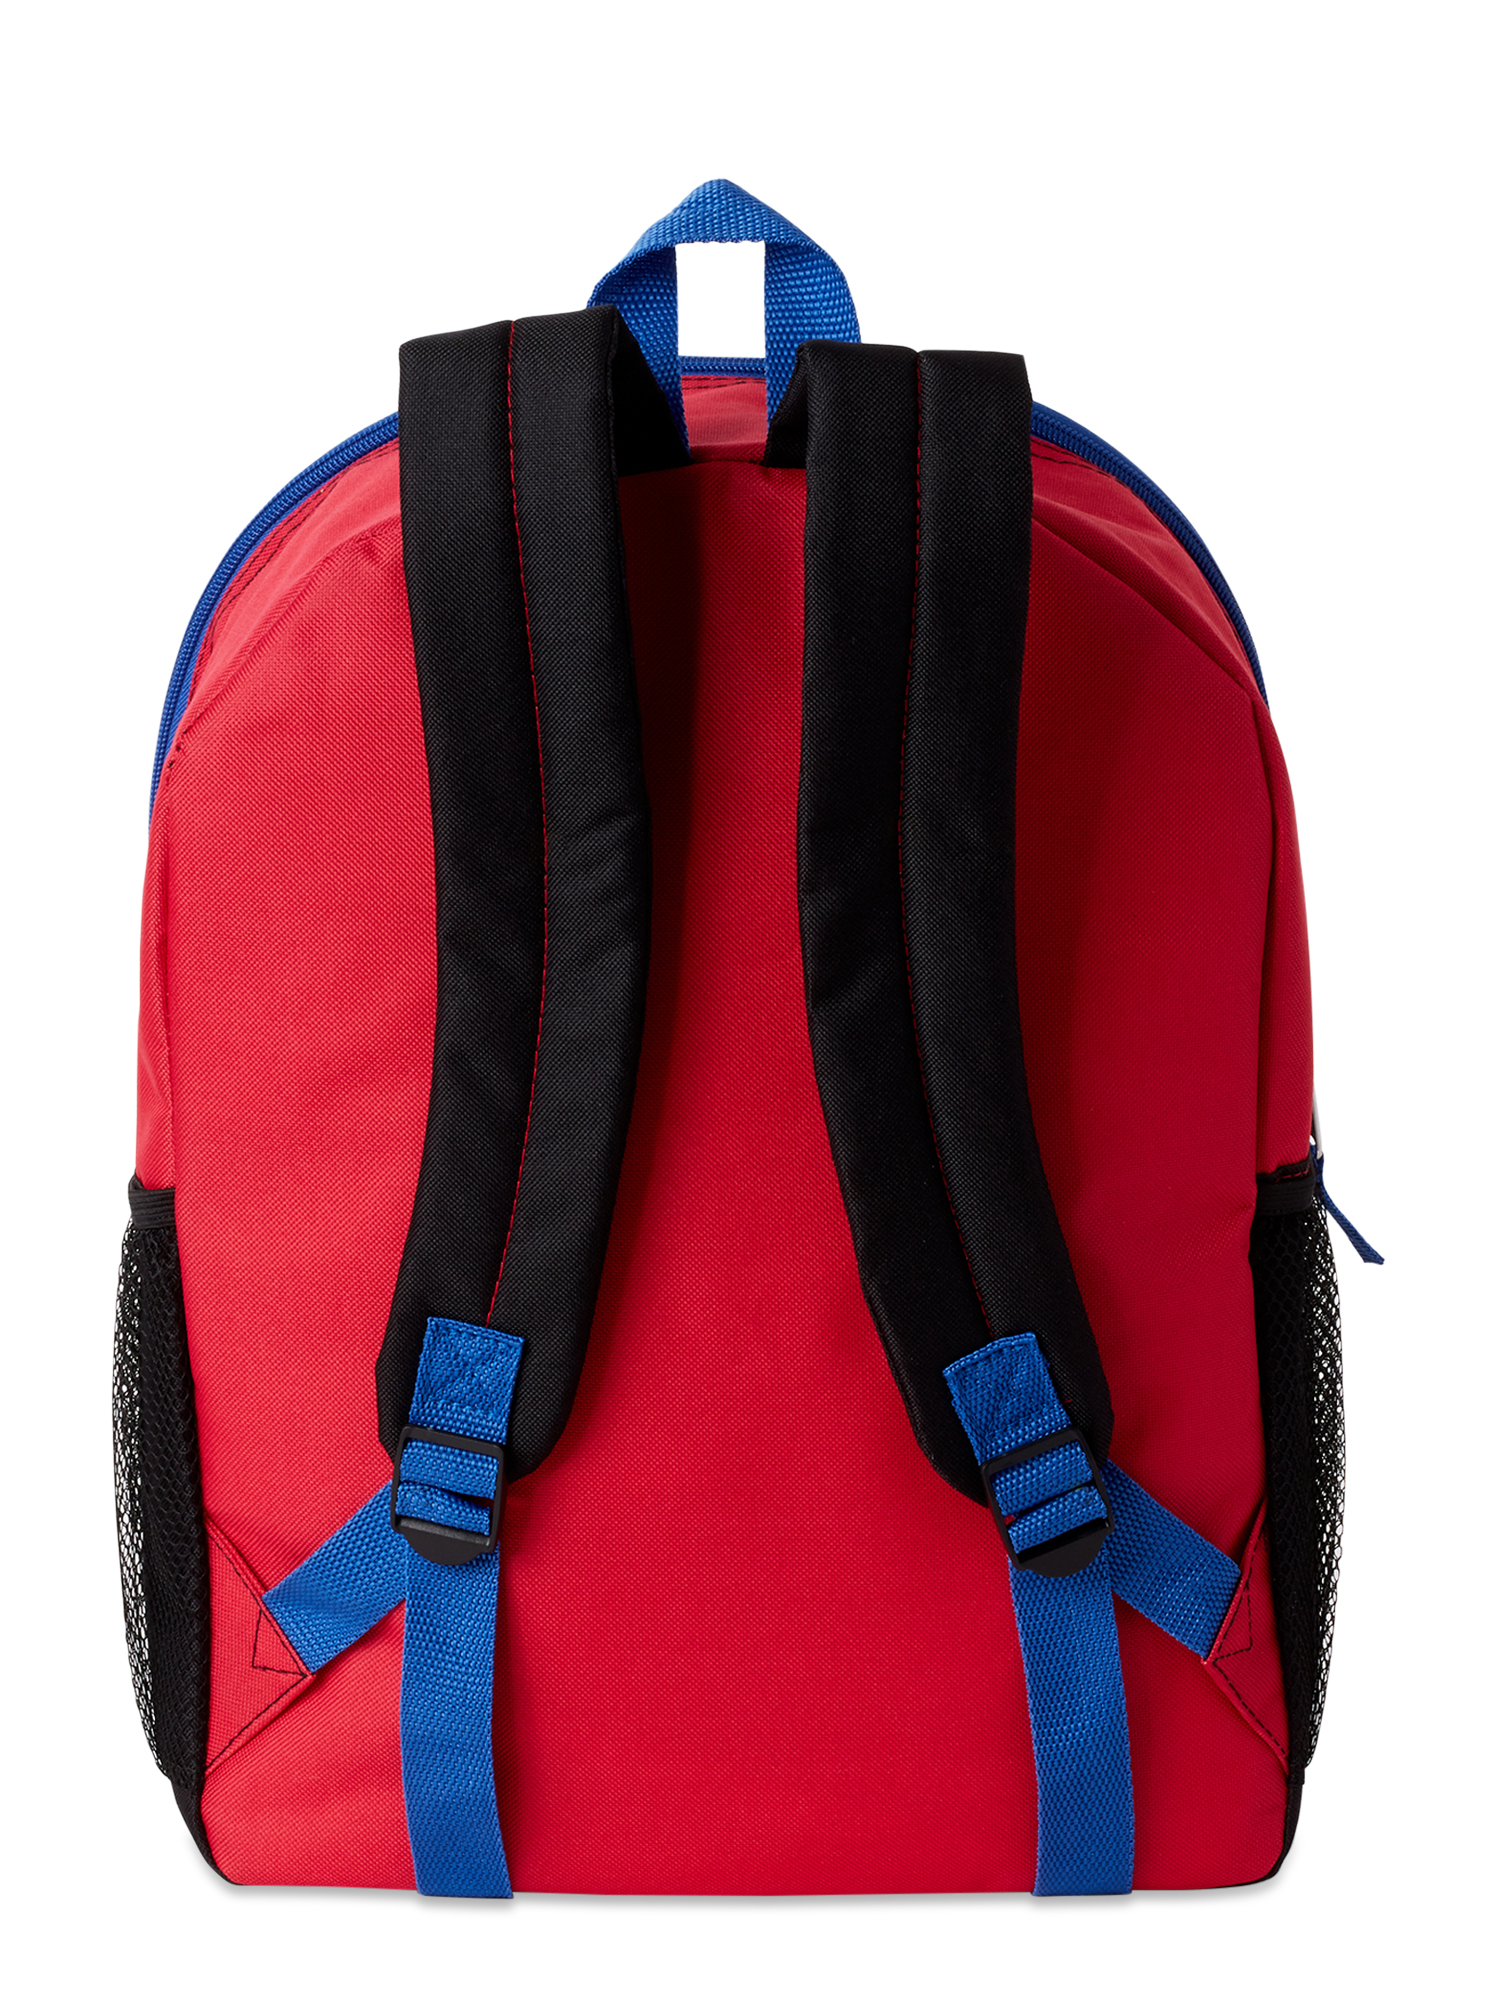 Spider-Man Backpack with Lunch Bag - image 3 of 4